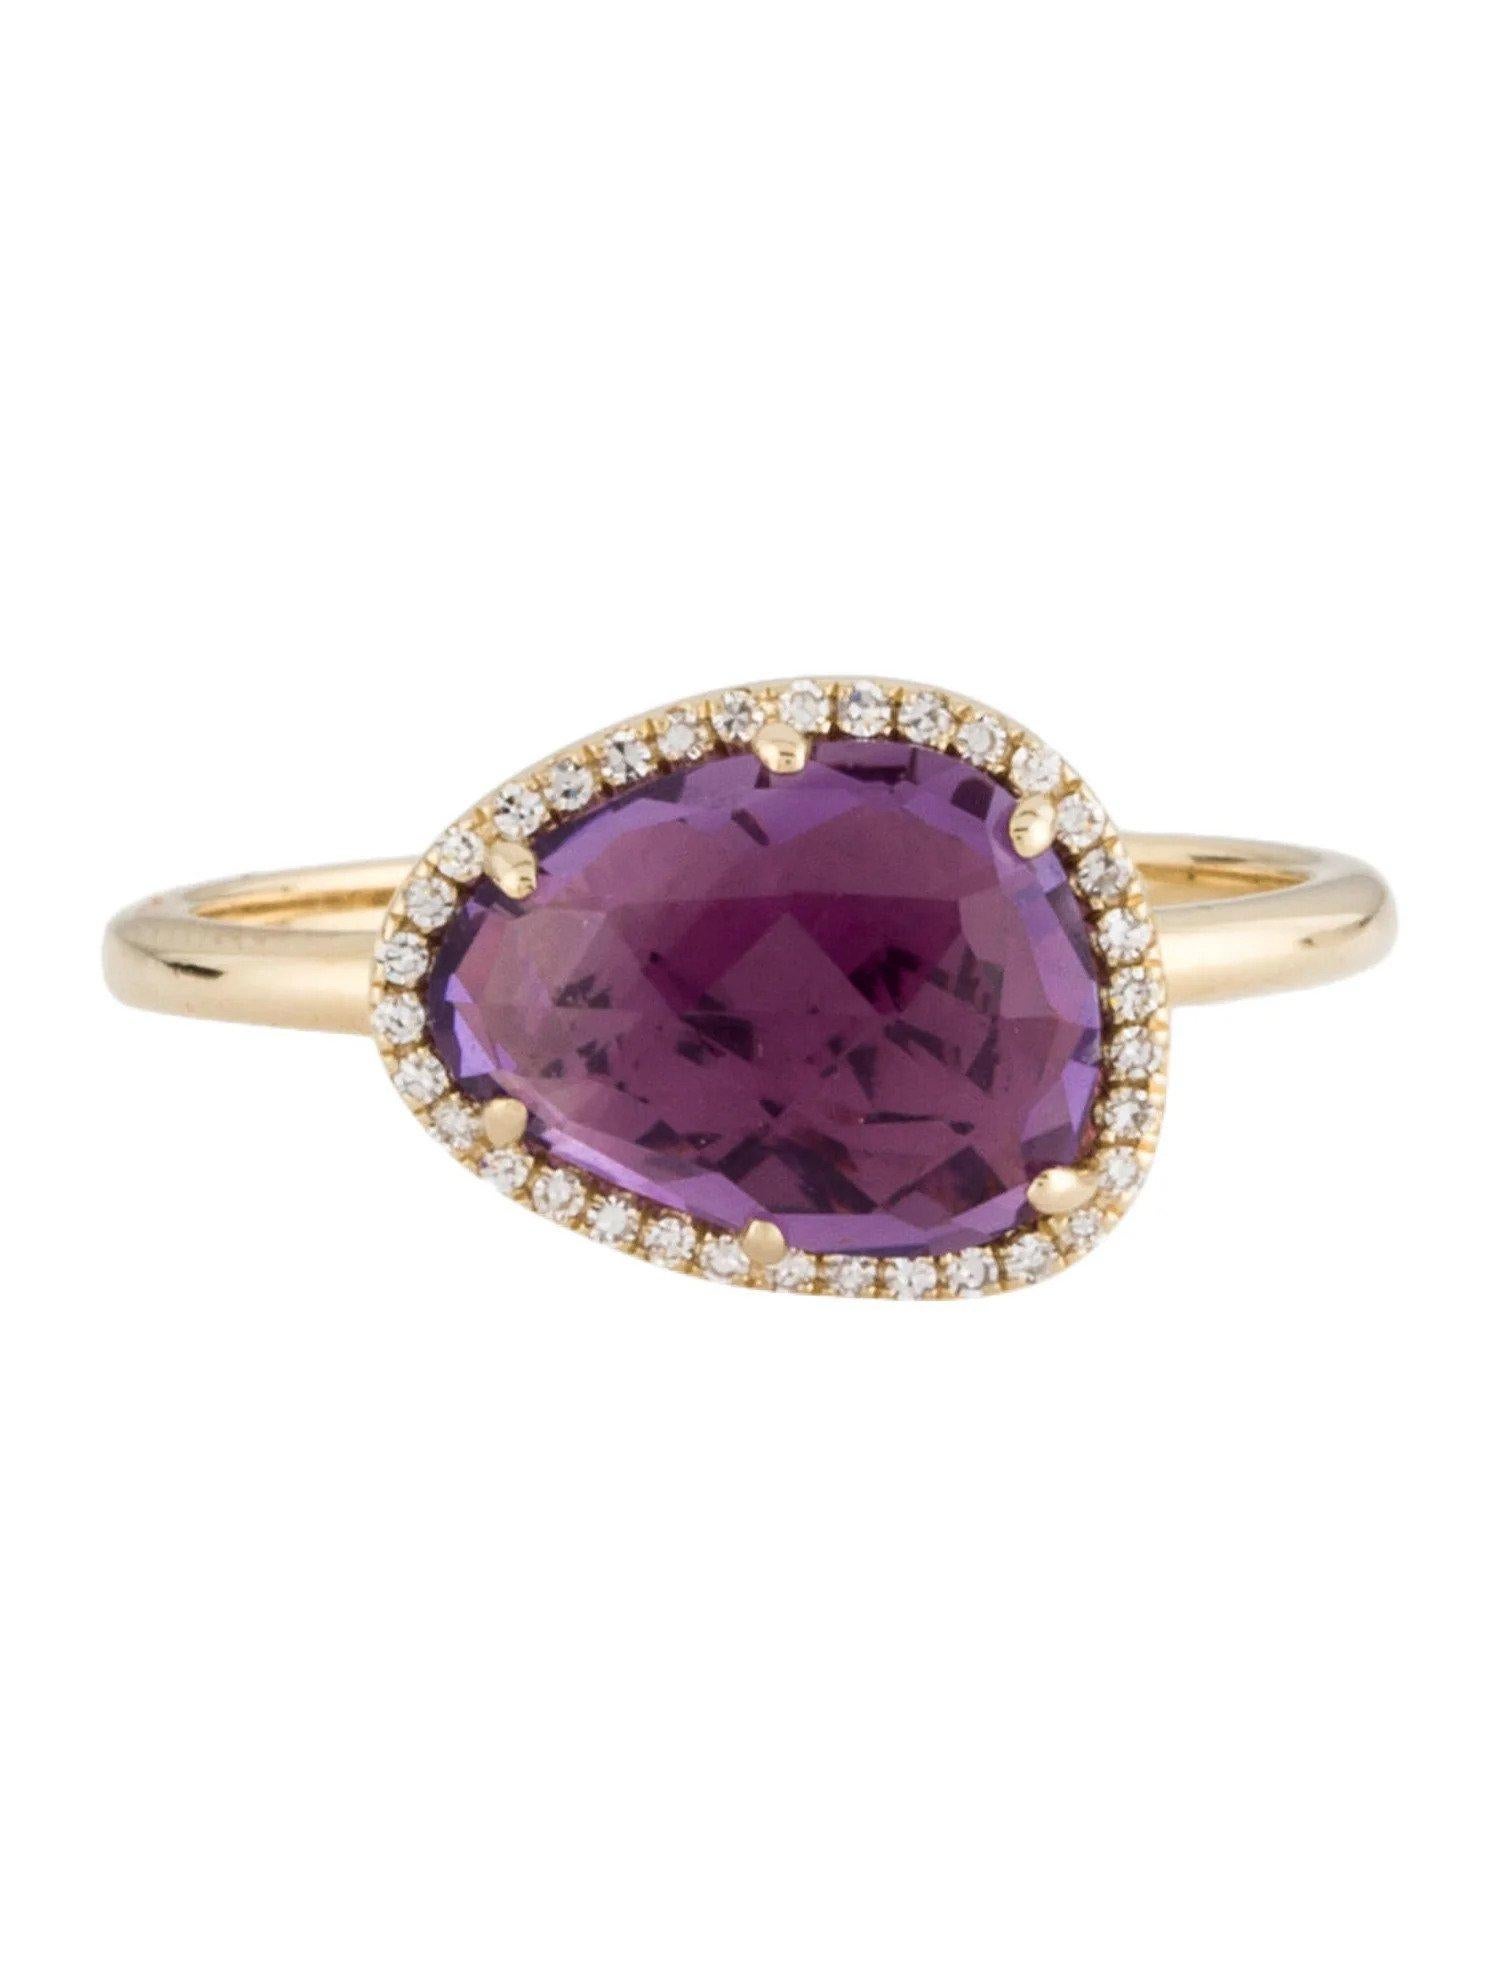 This Amethyst & Diamond Ring is a stunning and timeless accessory that can add a touch of glamour and sophistication to any outfit. 

This ring features a 1.97 Carat Mixed Cut Purple Amethyst (12 x 9 MM), with a Diamond Halo comprised of 0.08 Carats